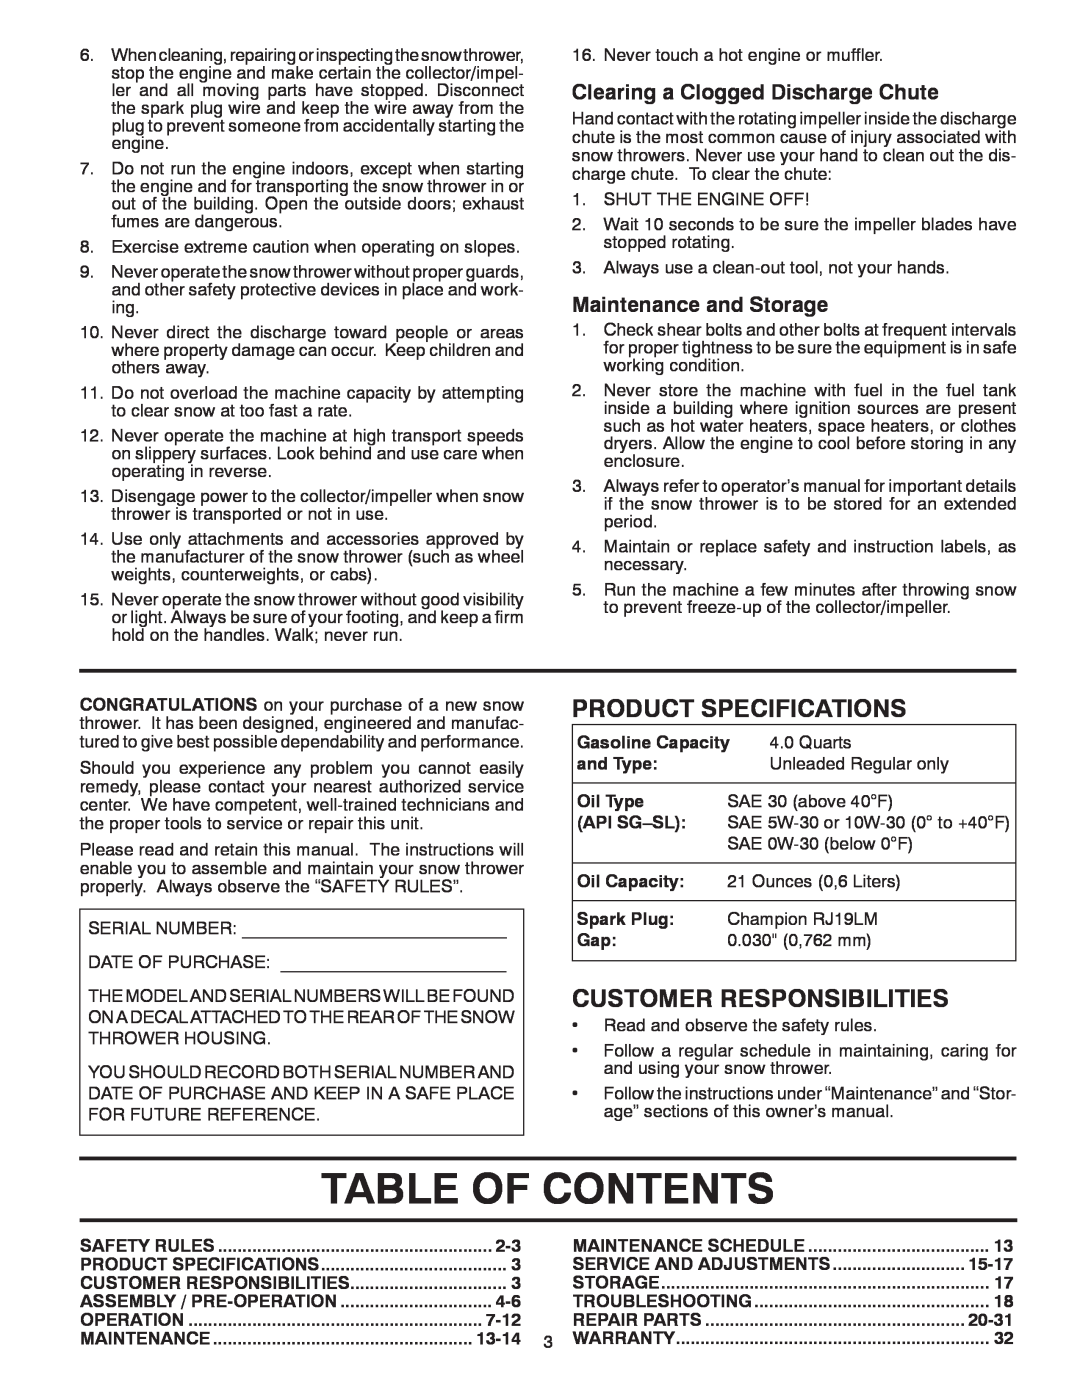 Poulan 415308 Table Of Contents, Product Specifications, Customer Responsibilities, Clearing a Clogged Discharge Chute 